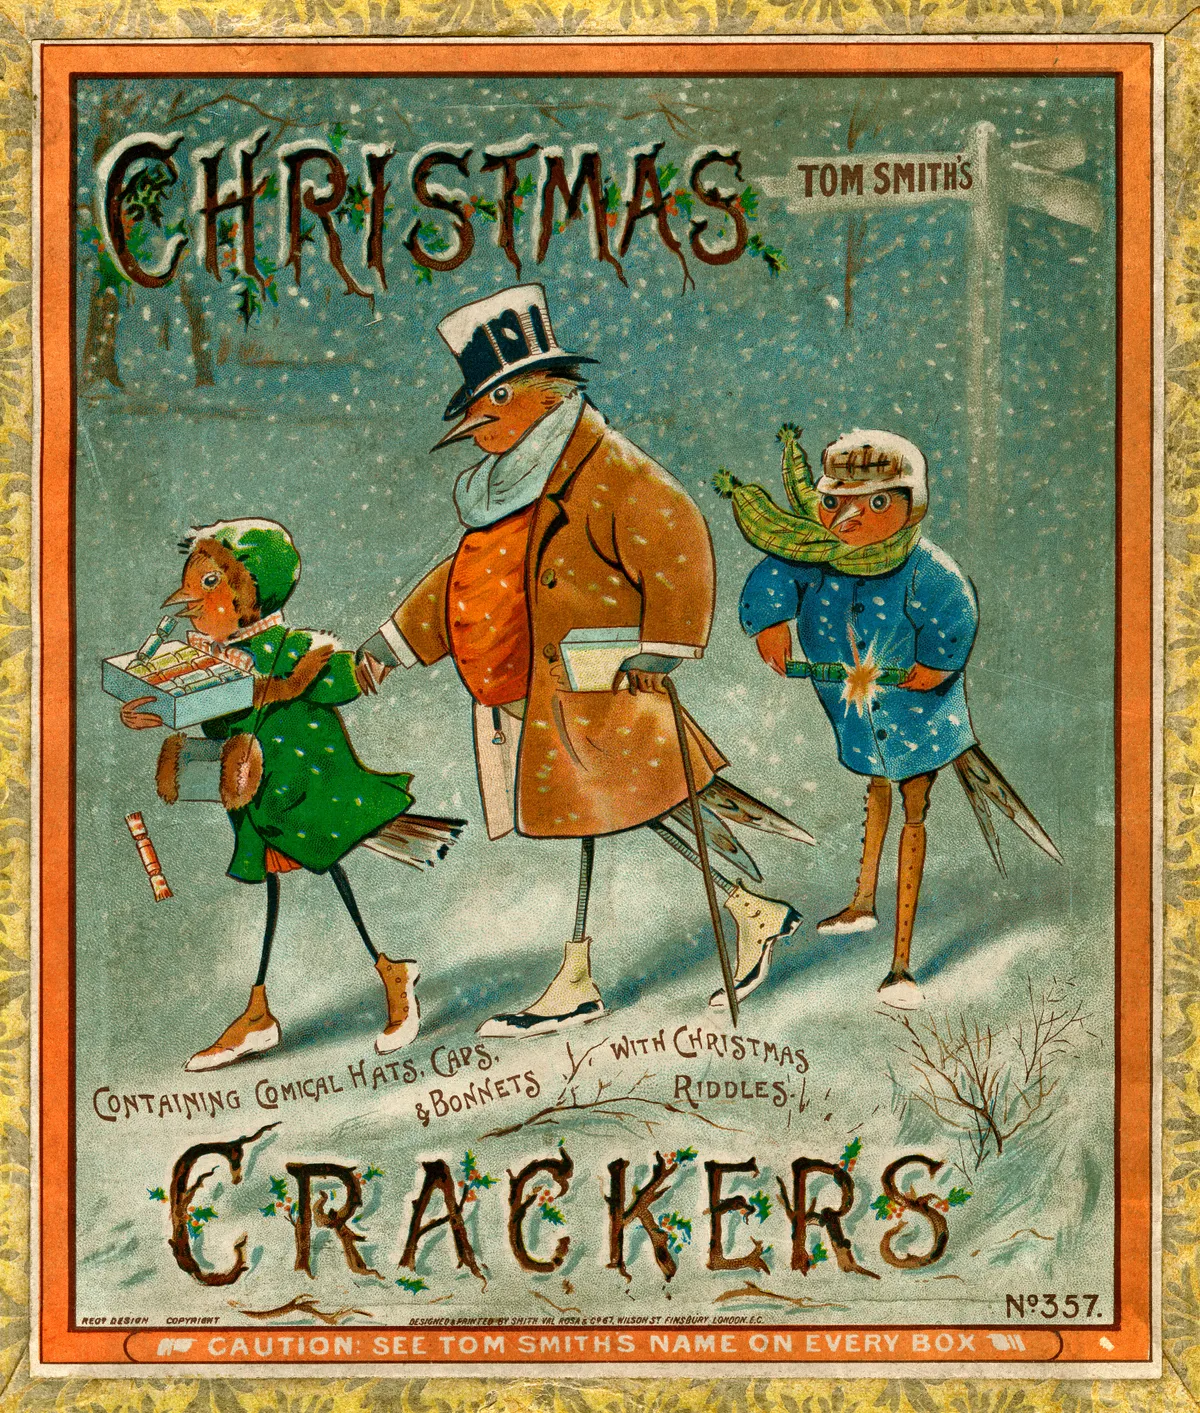 Who invented Christmas crackers